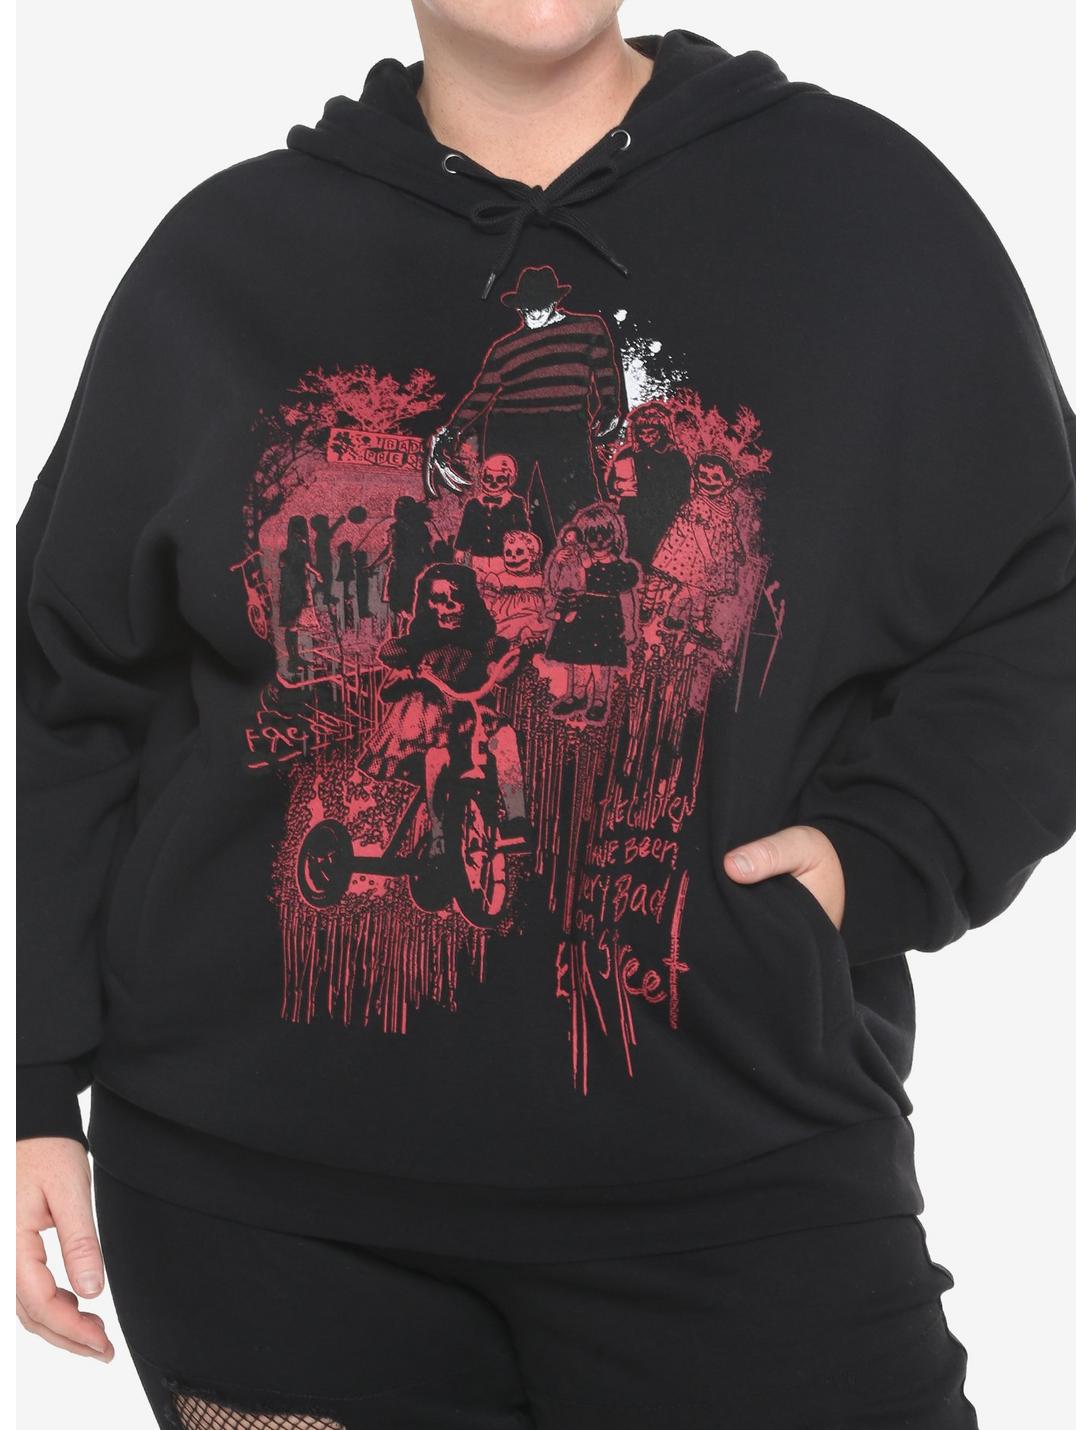 A Nightmare On Elm Street The Children Have Been Very Bad Hoodie Girls Plus Size, MULTI, hi-res